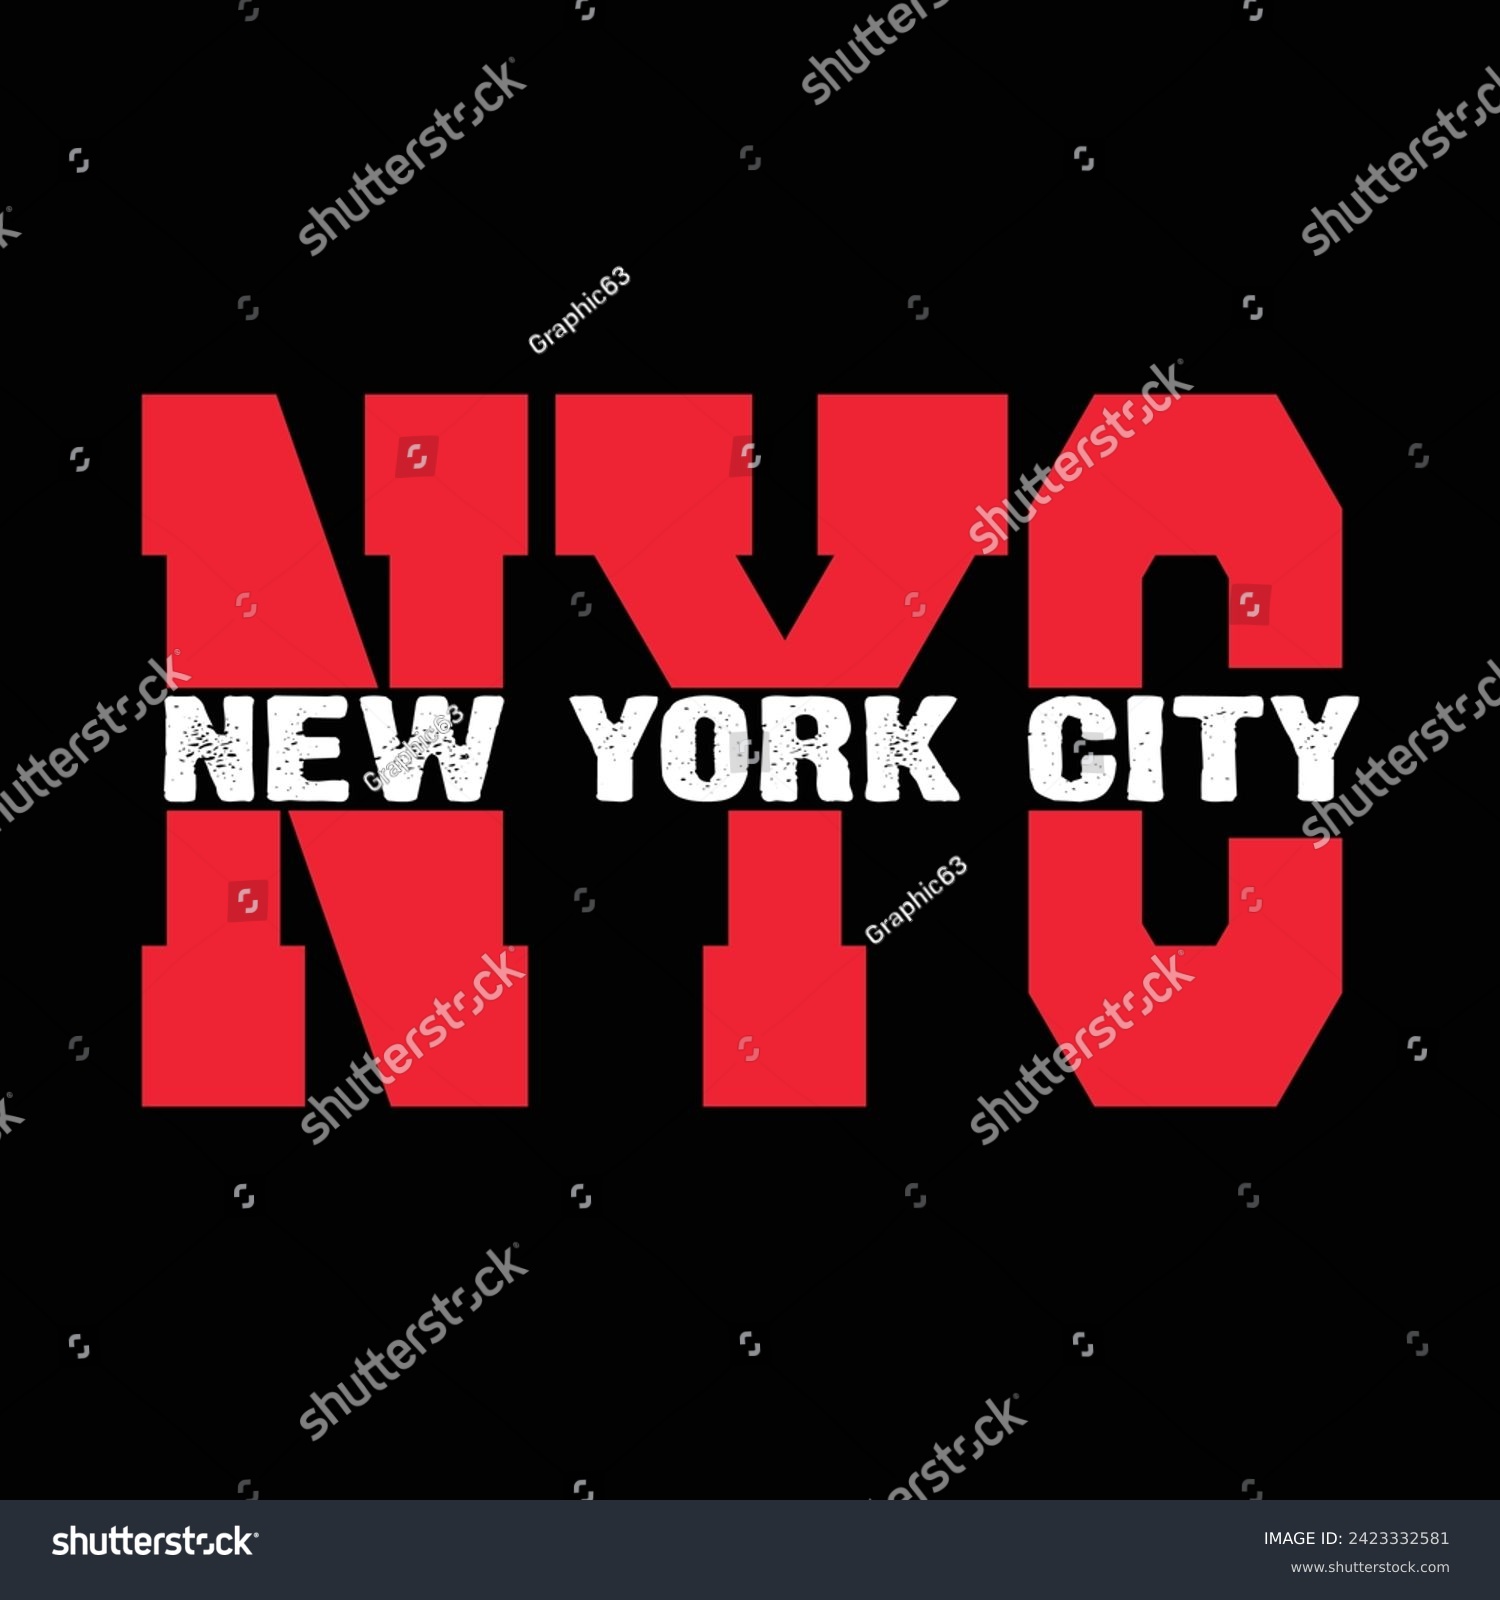 SVG of Nyc America New York City Typography Quotes Motivational New Design Vector For T Shirt,Backround,Poster,Banner Print Illustration. svg